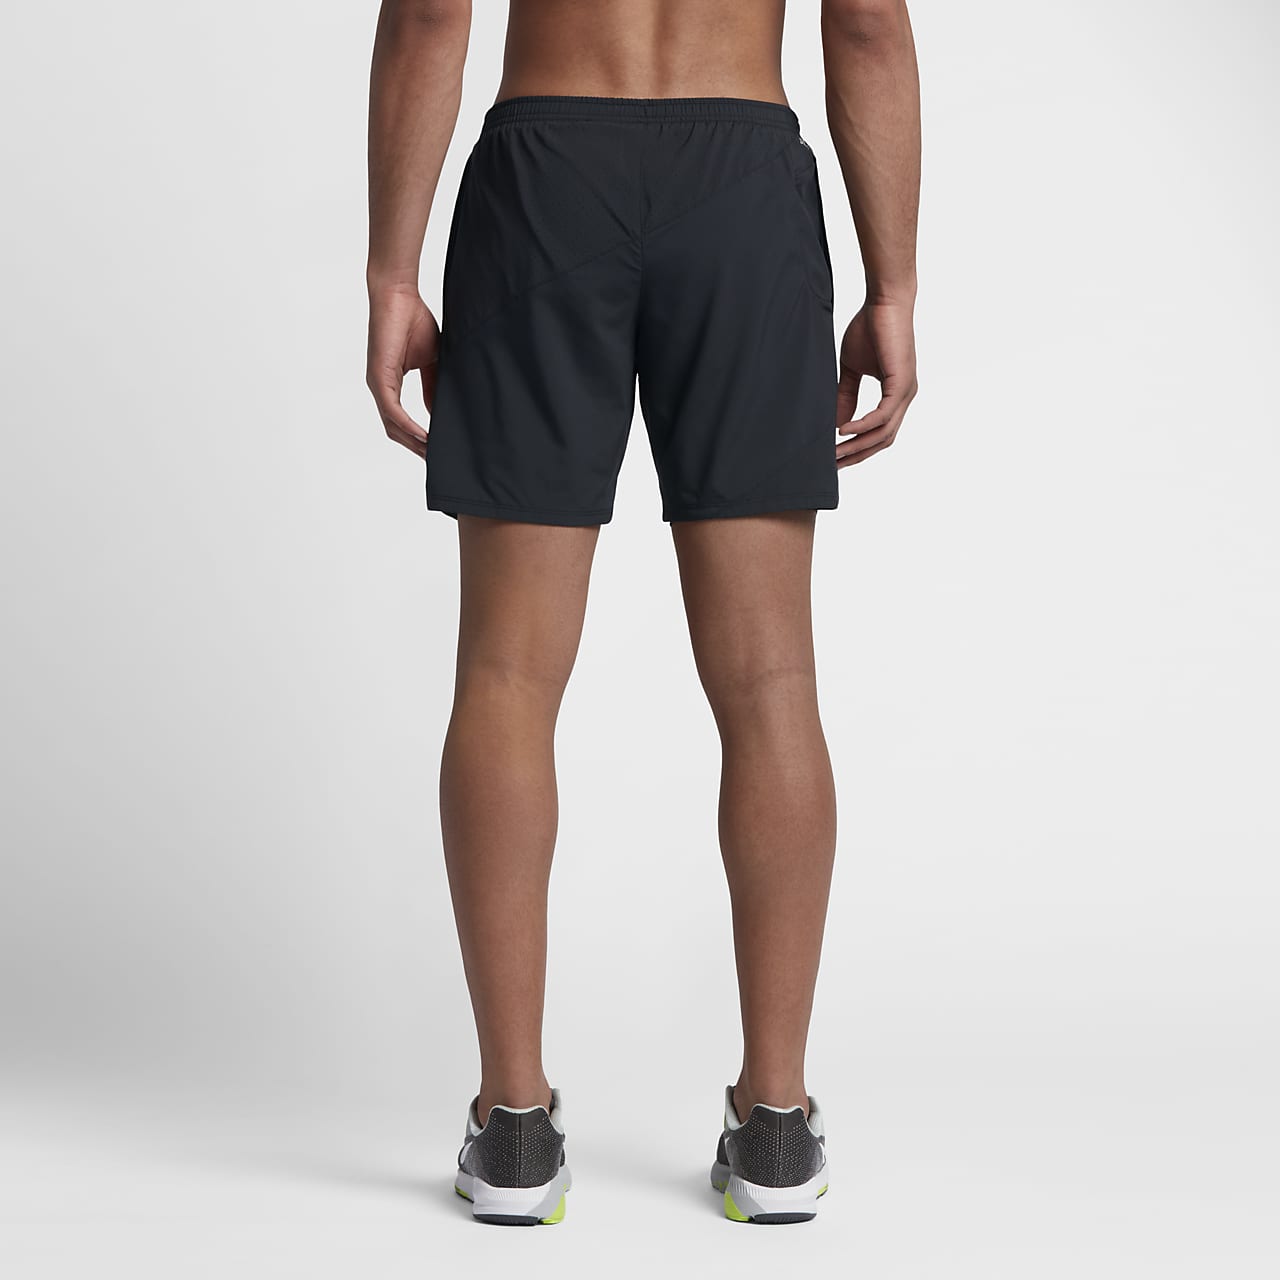 nike distance 2 in 1 running shorts